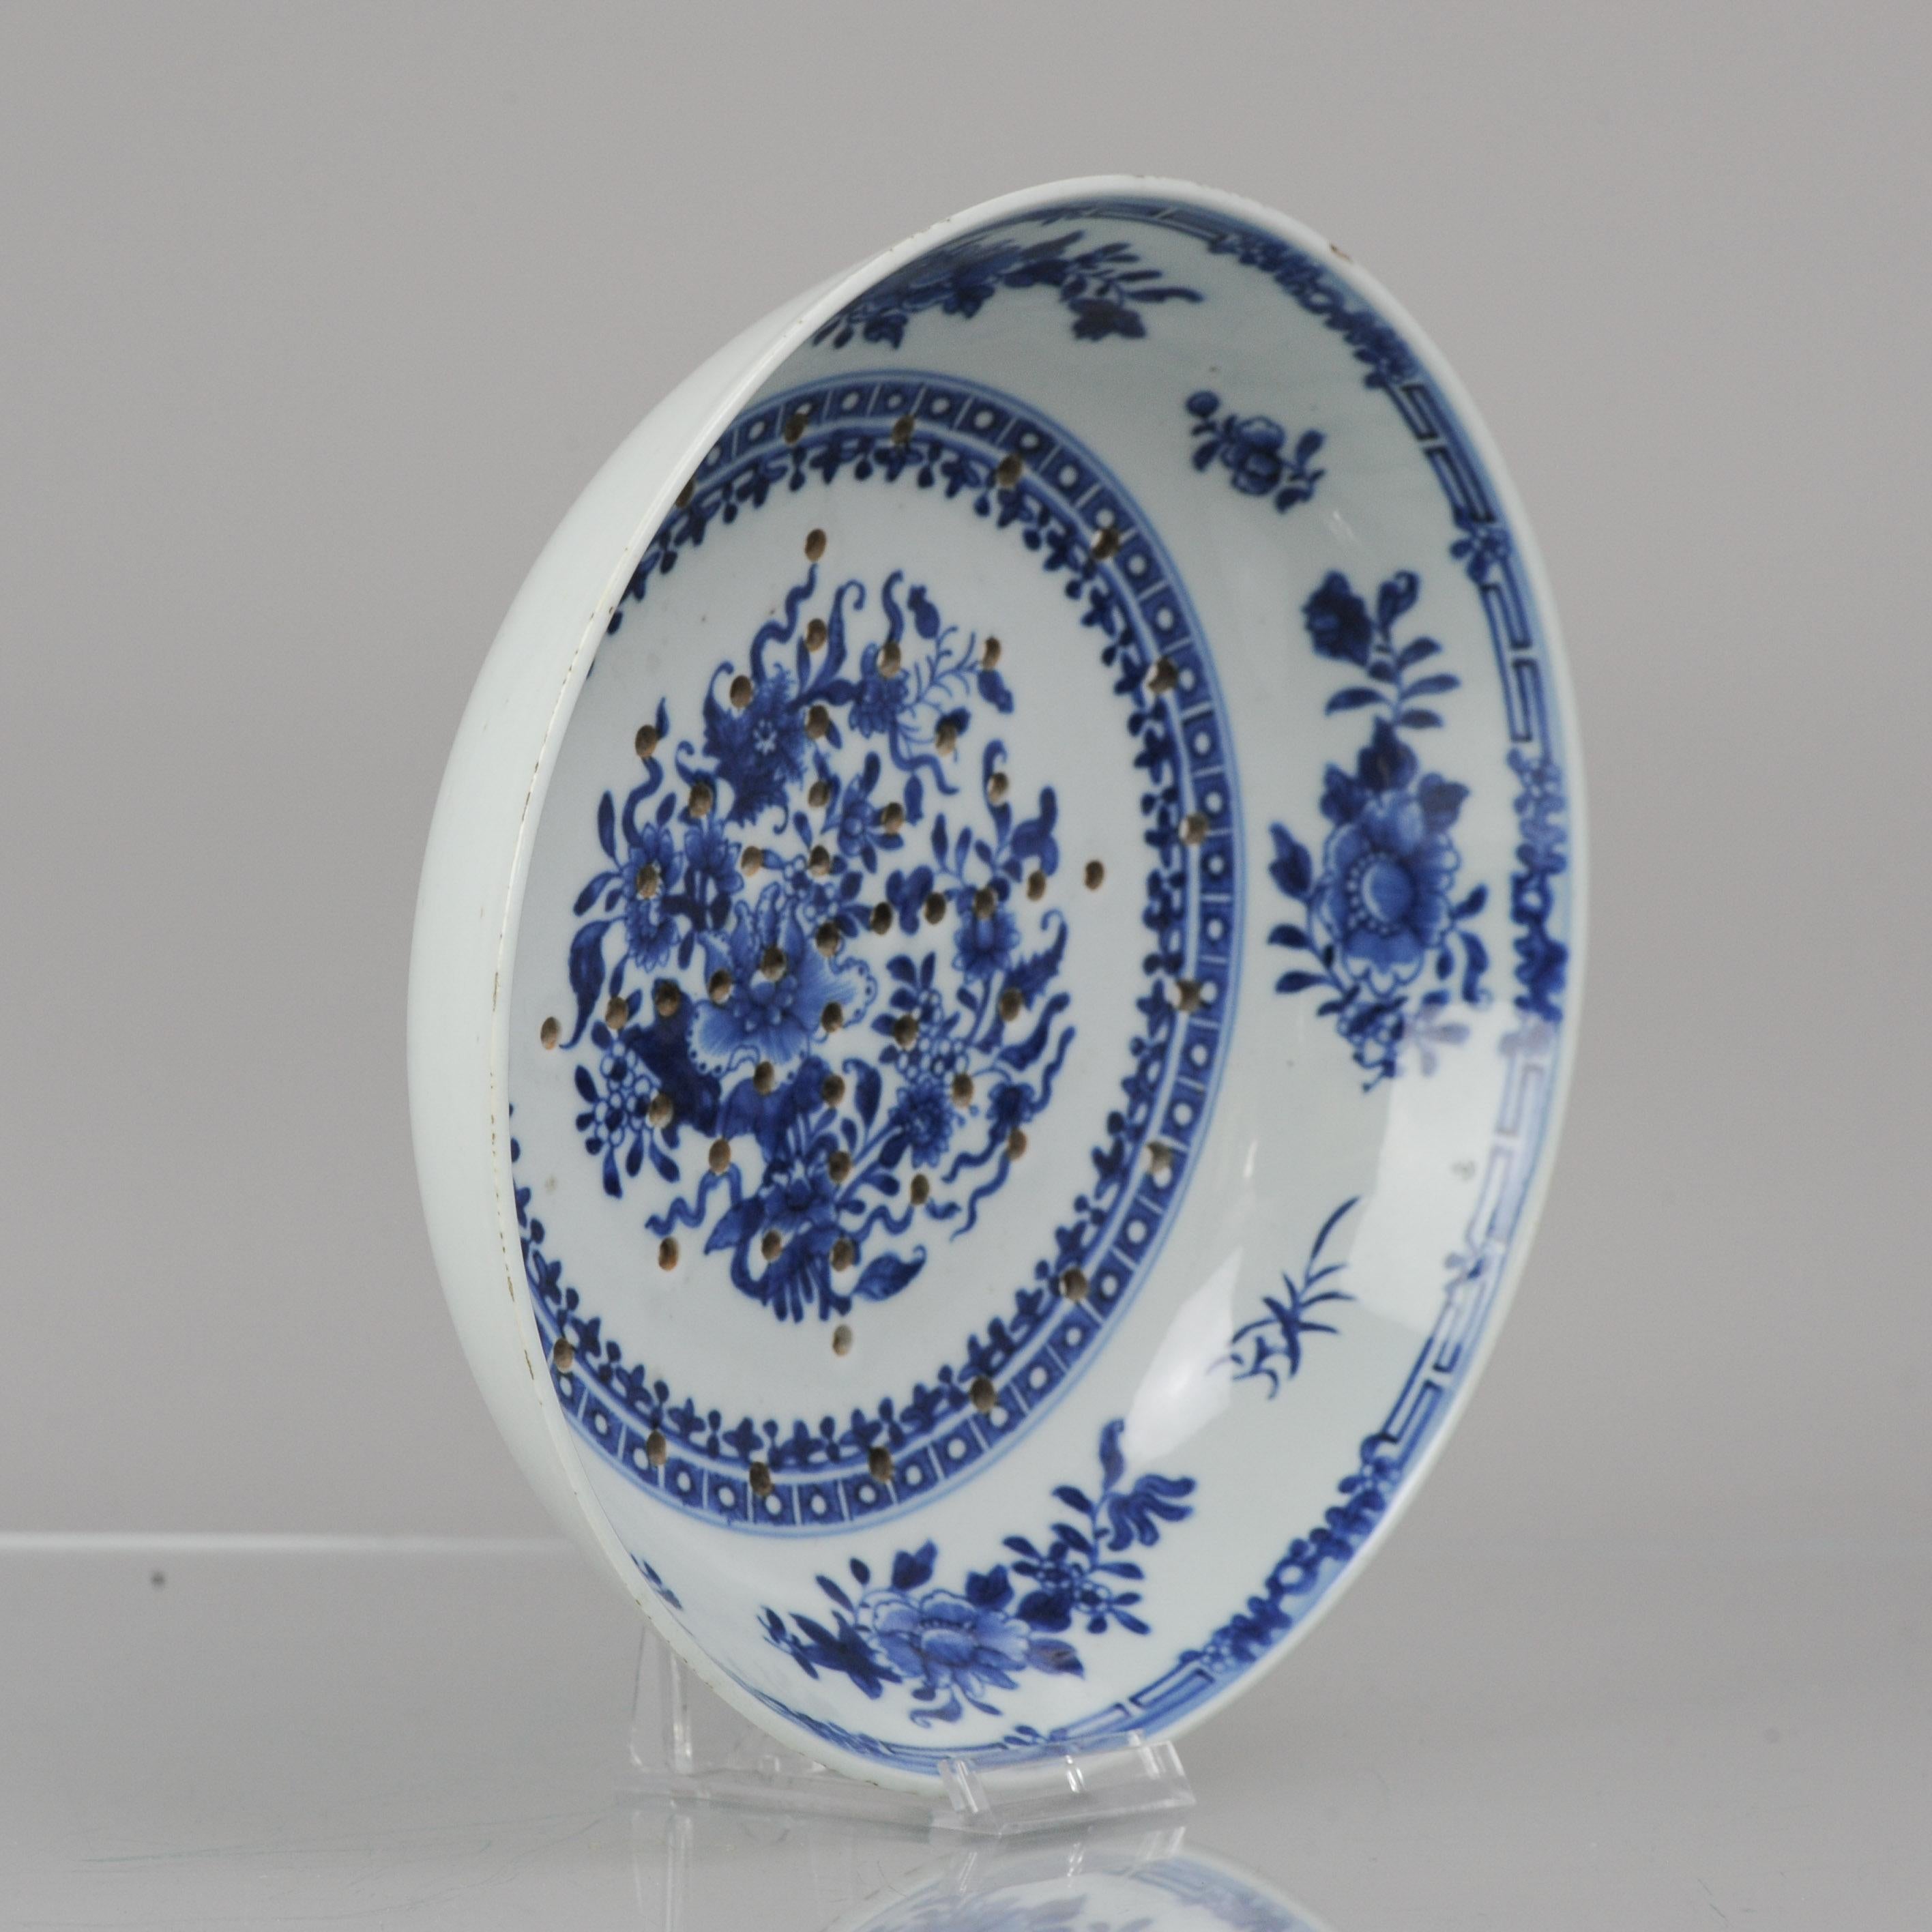 A nice strainer. Qing Dynasty - Qing Period. Central scene of flowers.

Additional information:
Material: Porcelain & Pottery
Region of Origin: China
Period: 18th century Qing (1661 - 1912)
Age: Pre-1800
Condition: Minimal fritting to rim only.